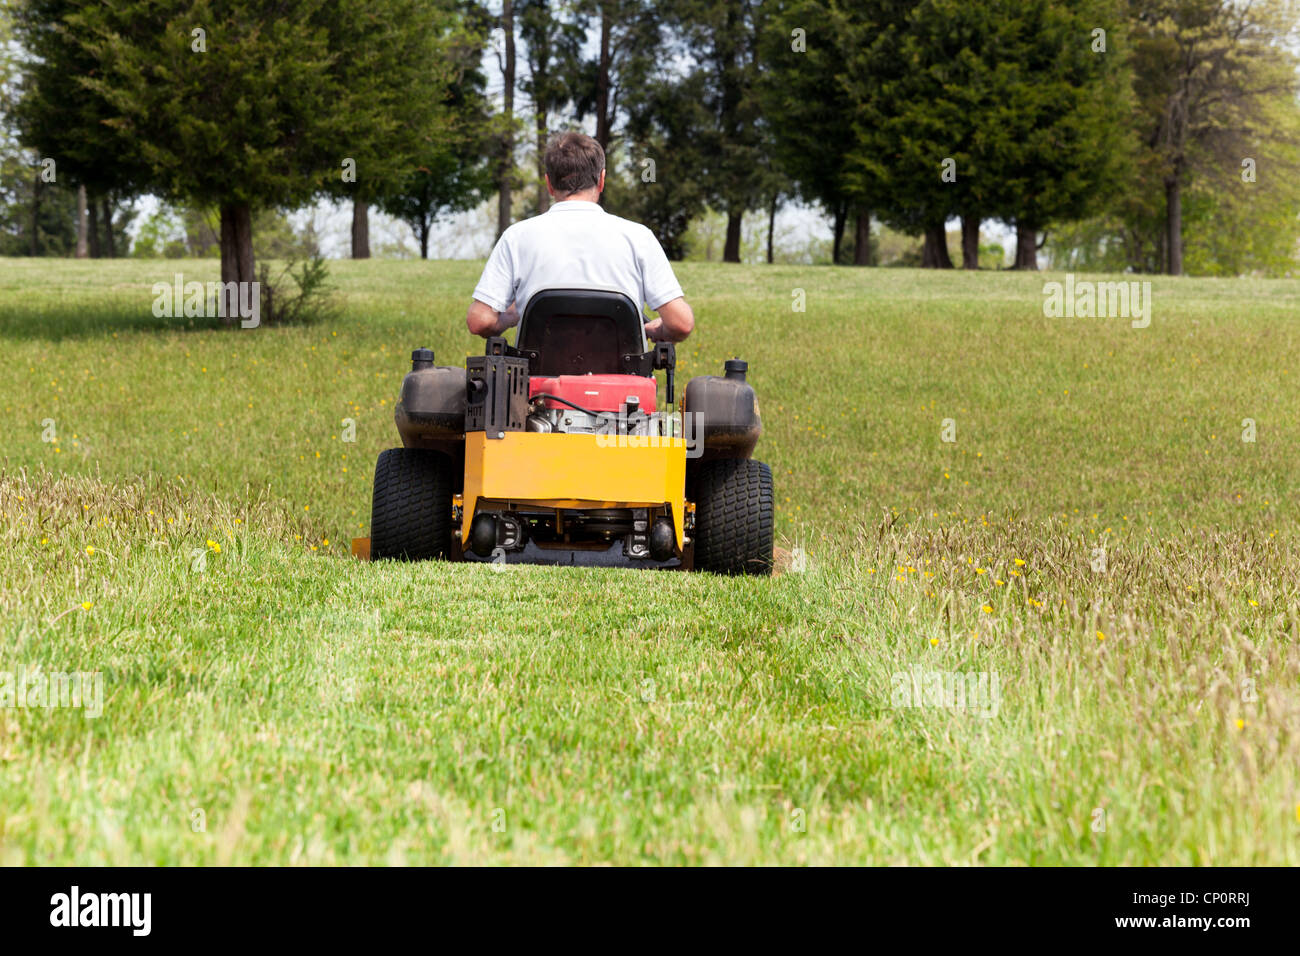 Senior retired male cutting the grass or mowing lawn on an expansive lawn using yellow zero-turn mower Stock Photo